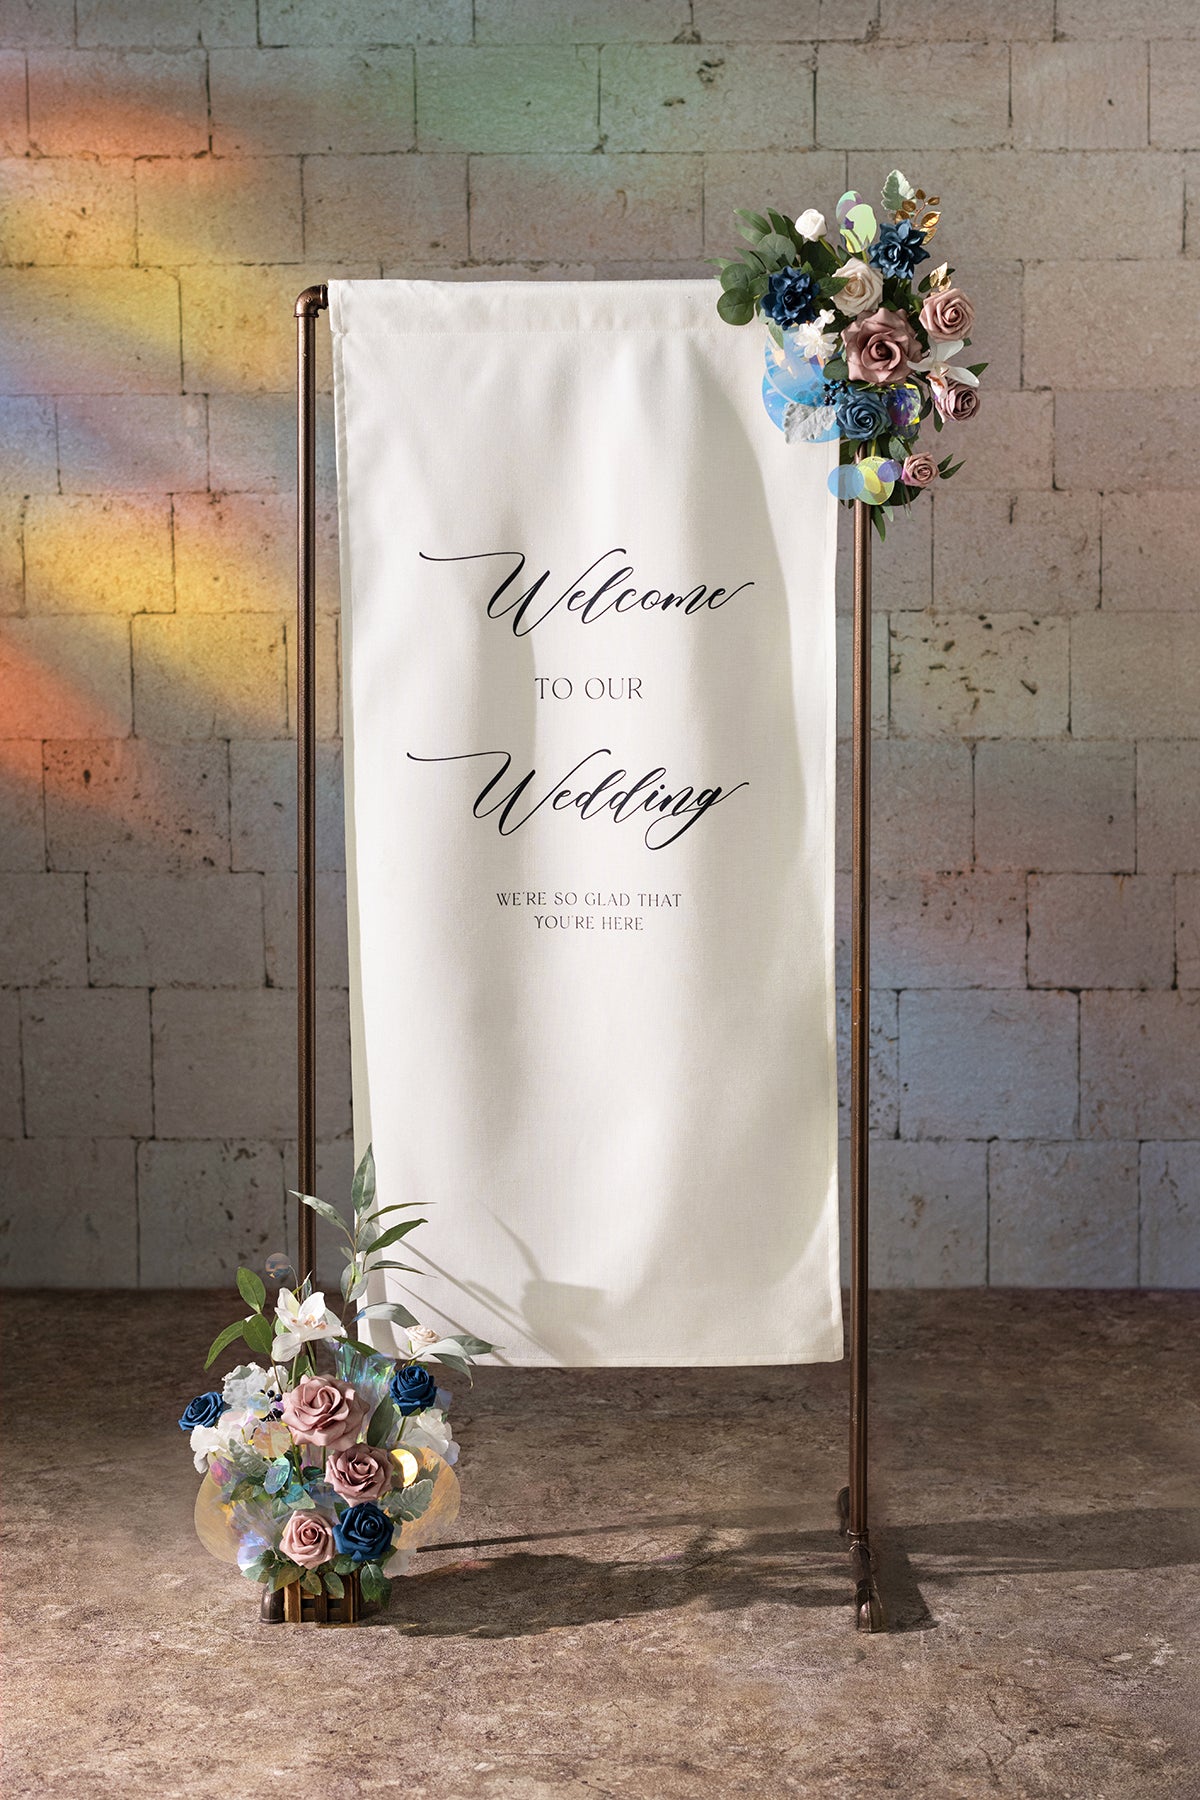 Flash Sale | Sign Flower Swag & Free-Standing Flowers in Dusty Rose & Navy